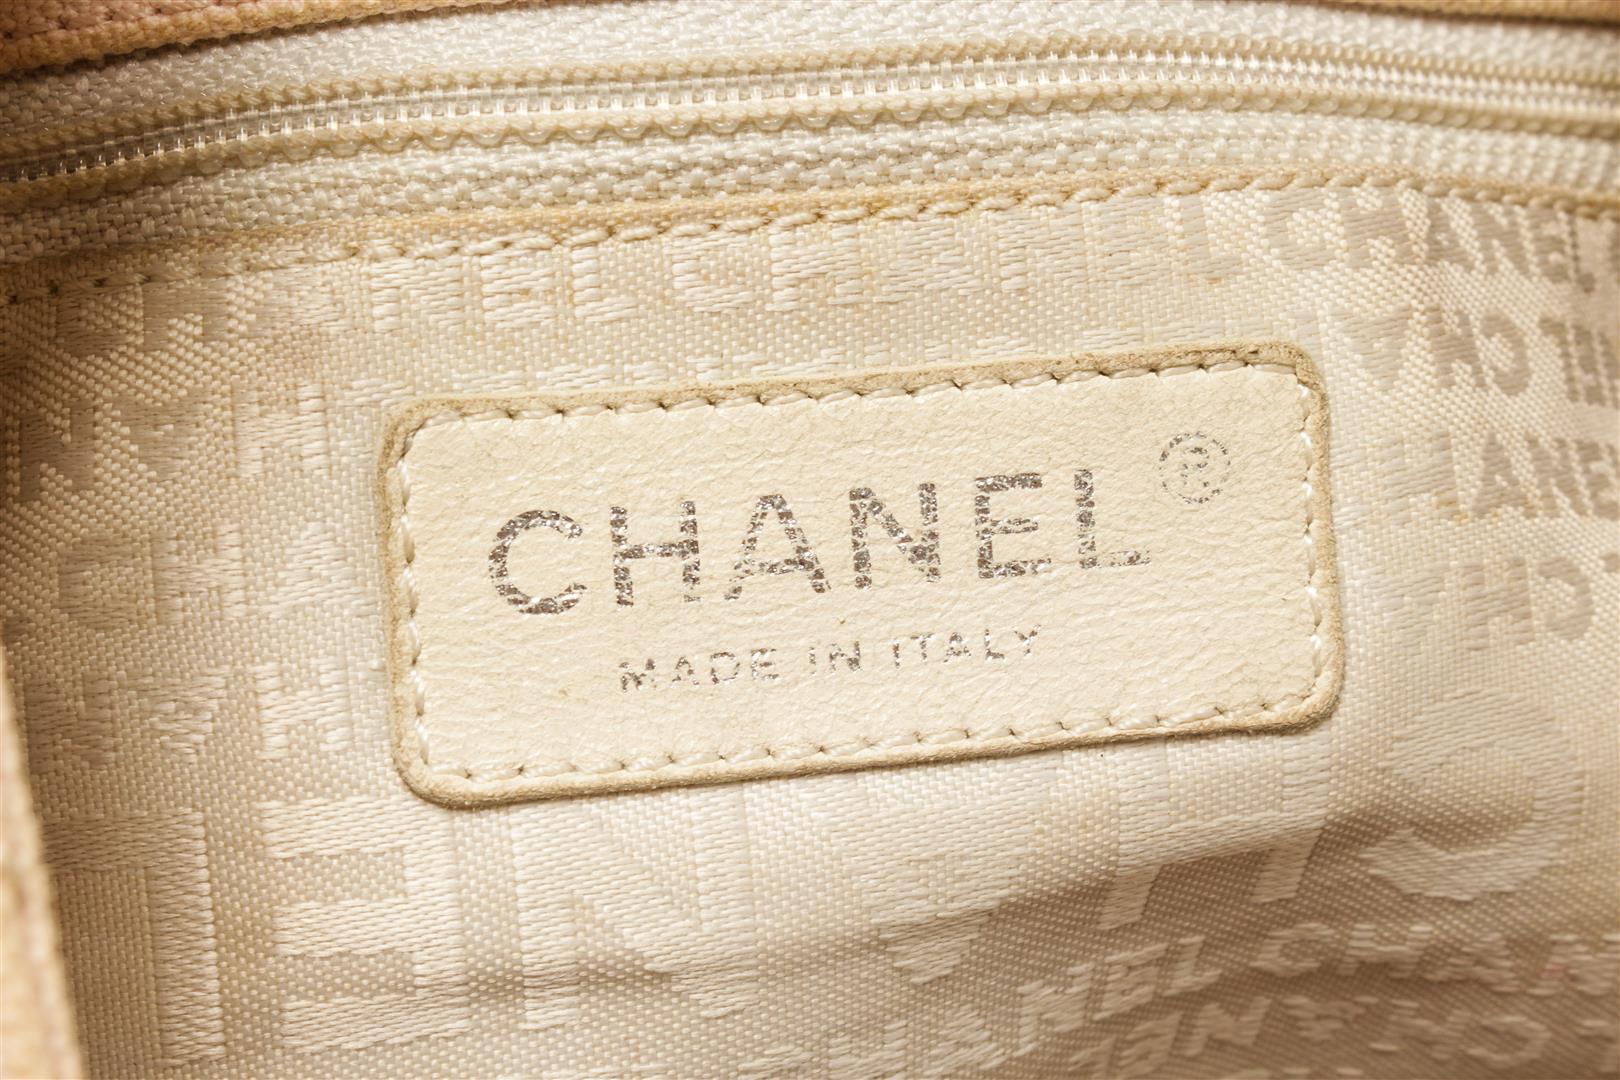 Chanel Light Pink Beige Leather No.5 Coco Mark Rope Tote Bag